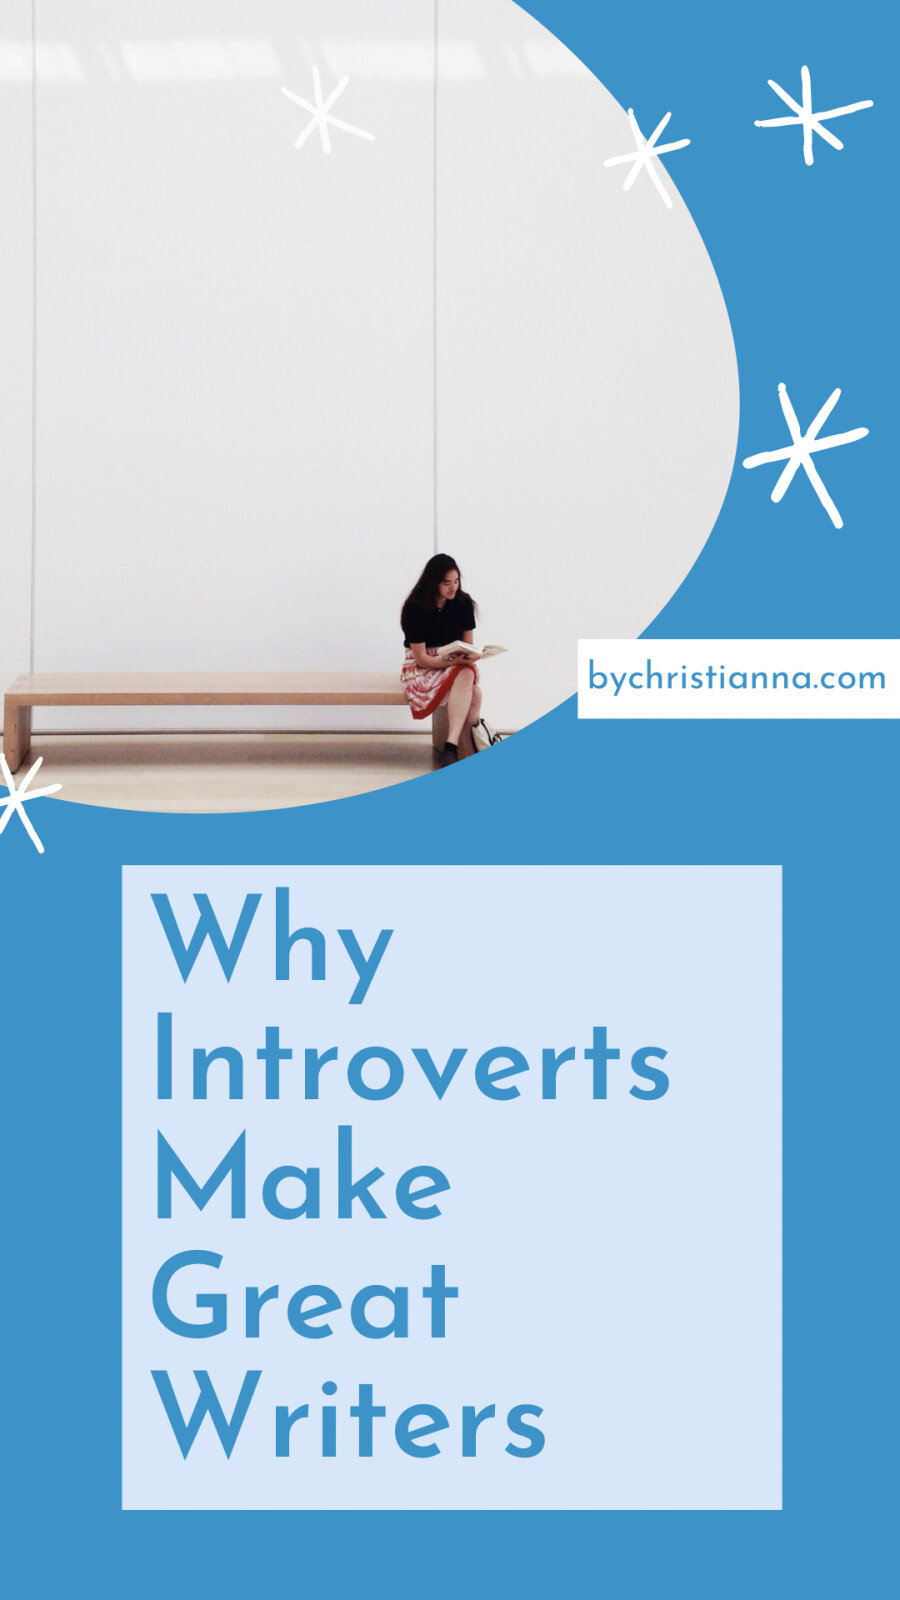 Why Introverts Make Great Writers